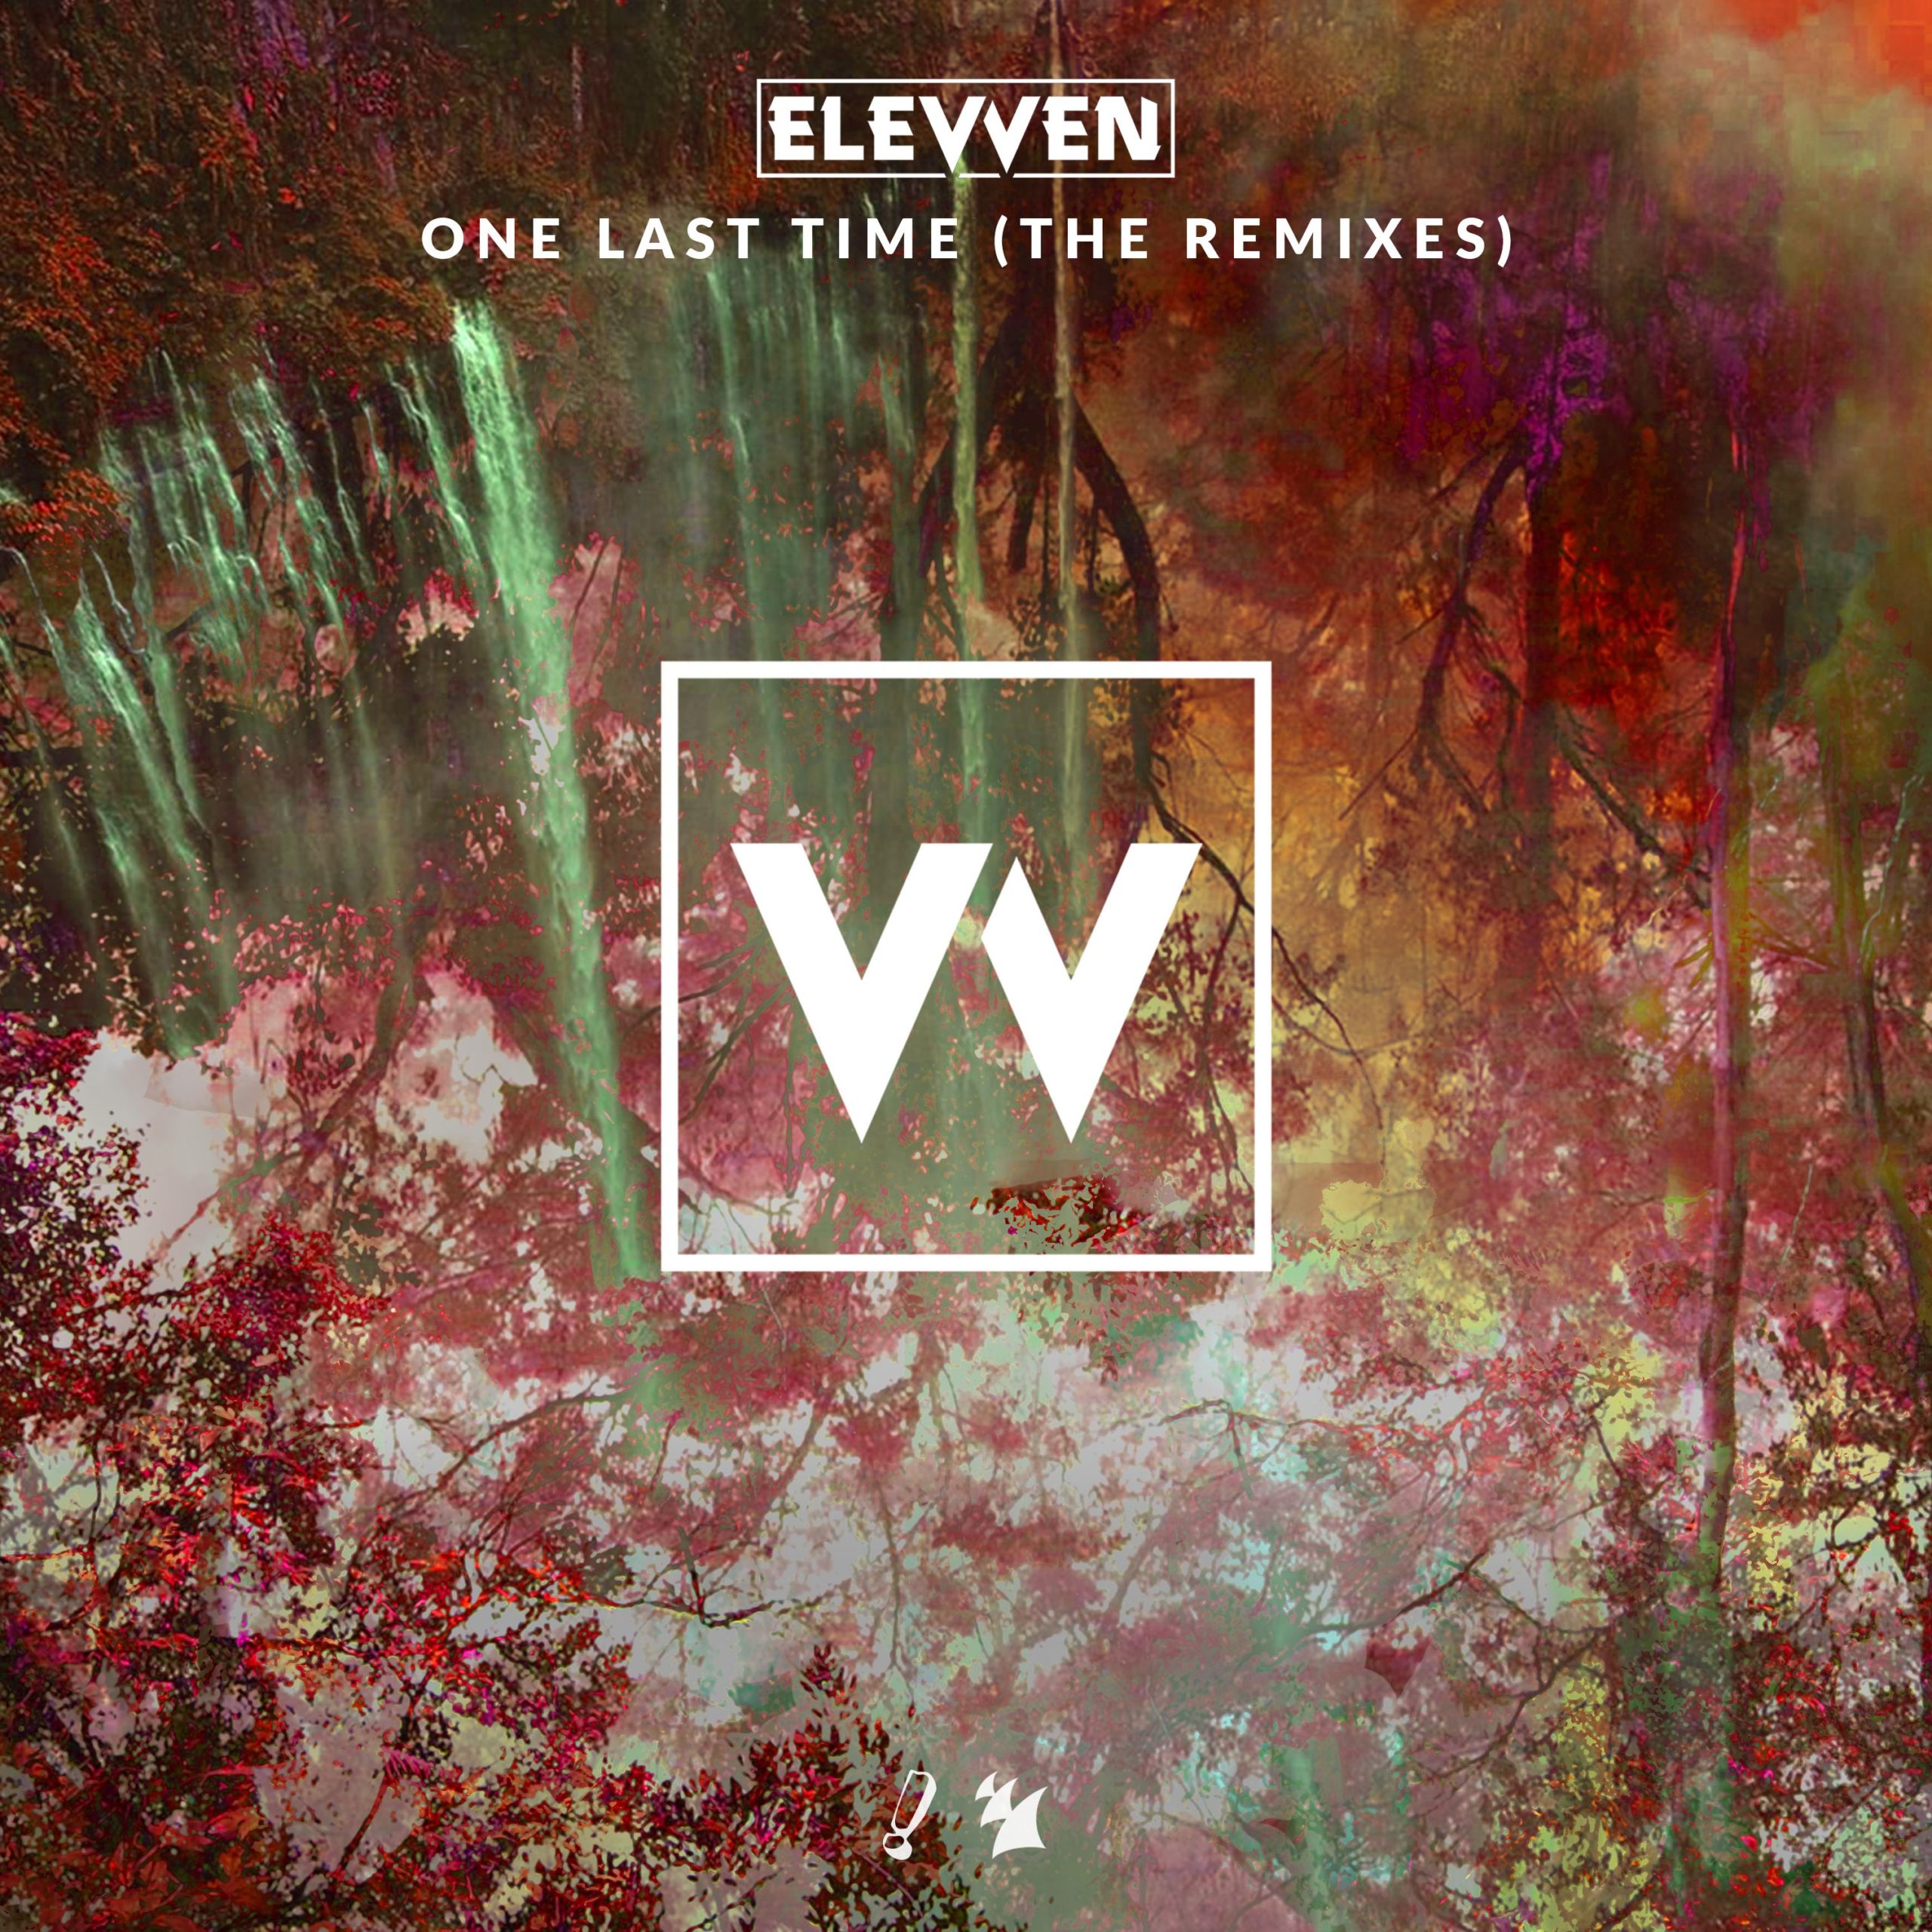 Elevven presents One Last Time (The Remixes) on Statement!